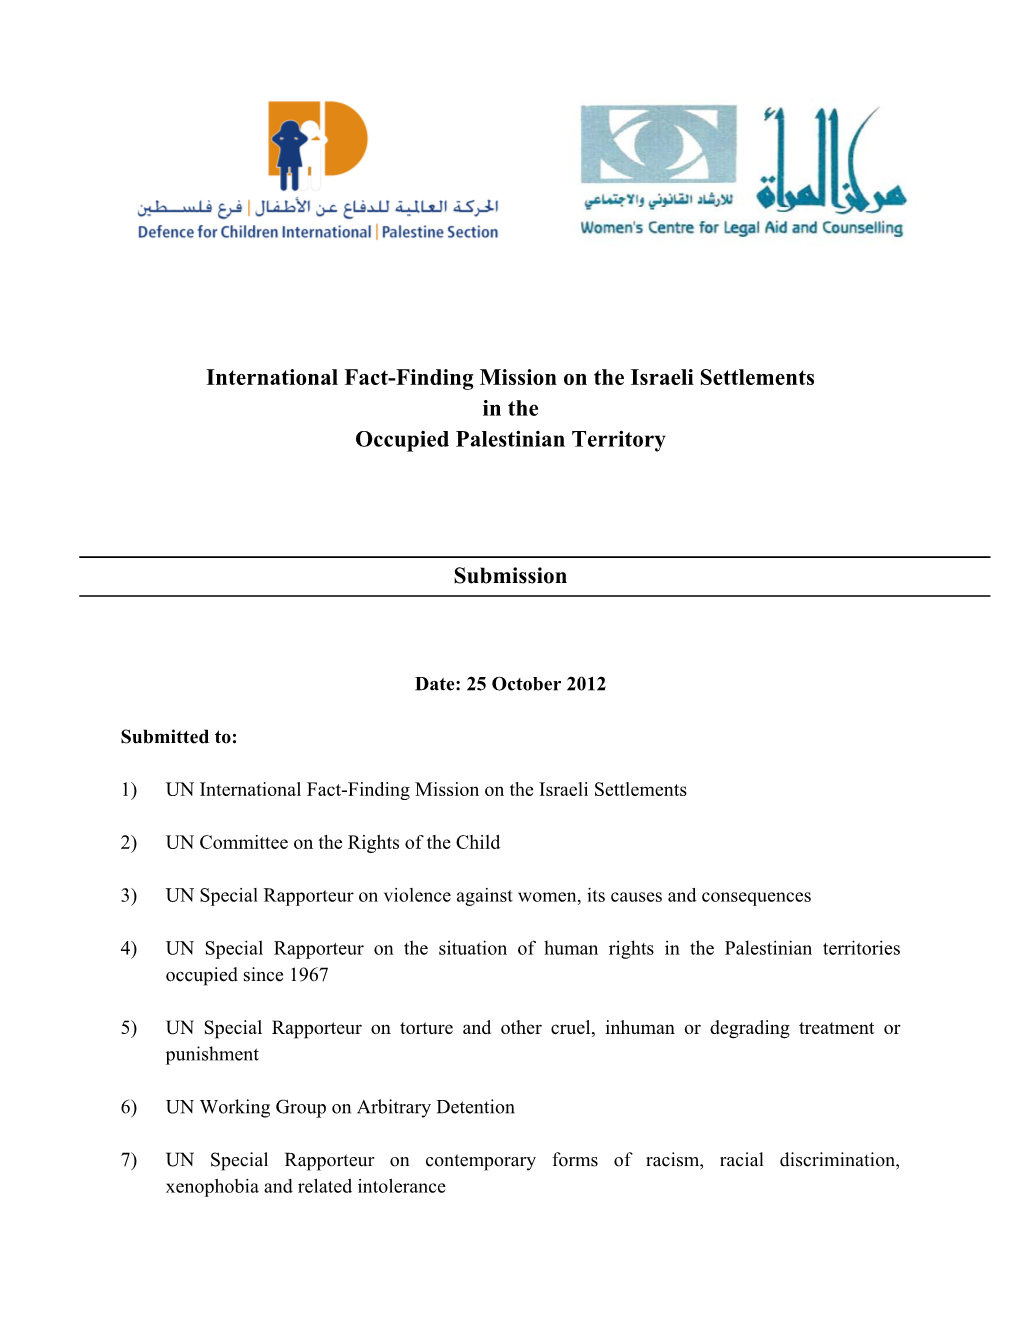 International Fact-Finding Mission on the Israeli Settlements in the Occupied Palestinian Territory